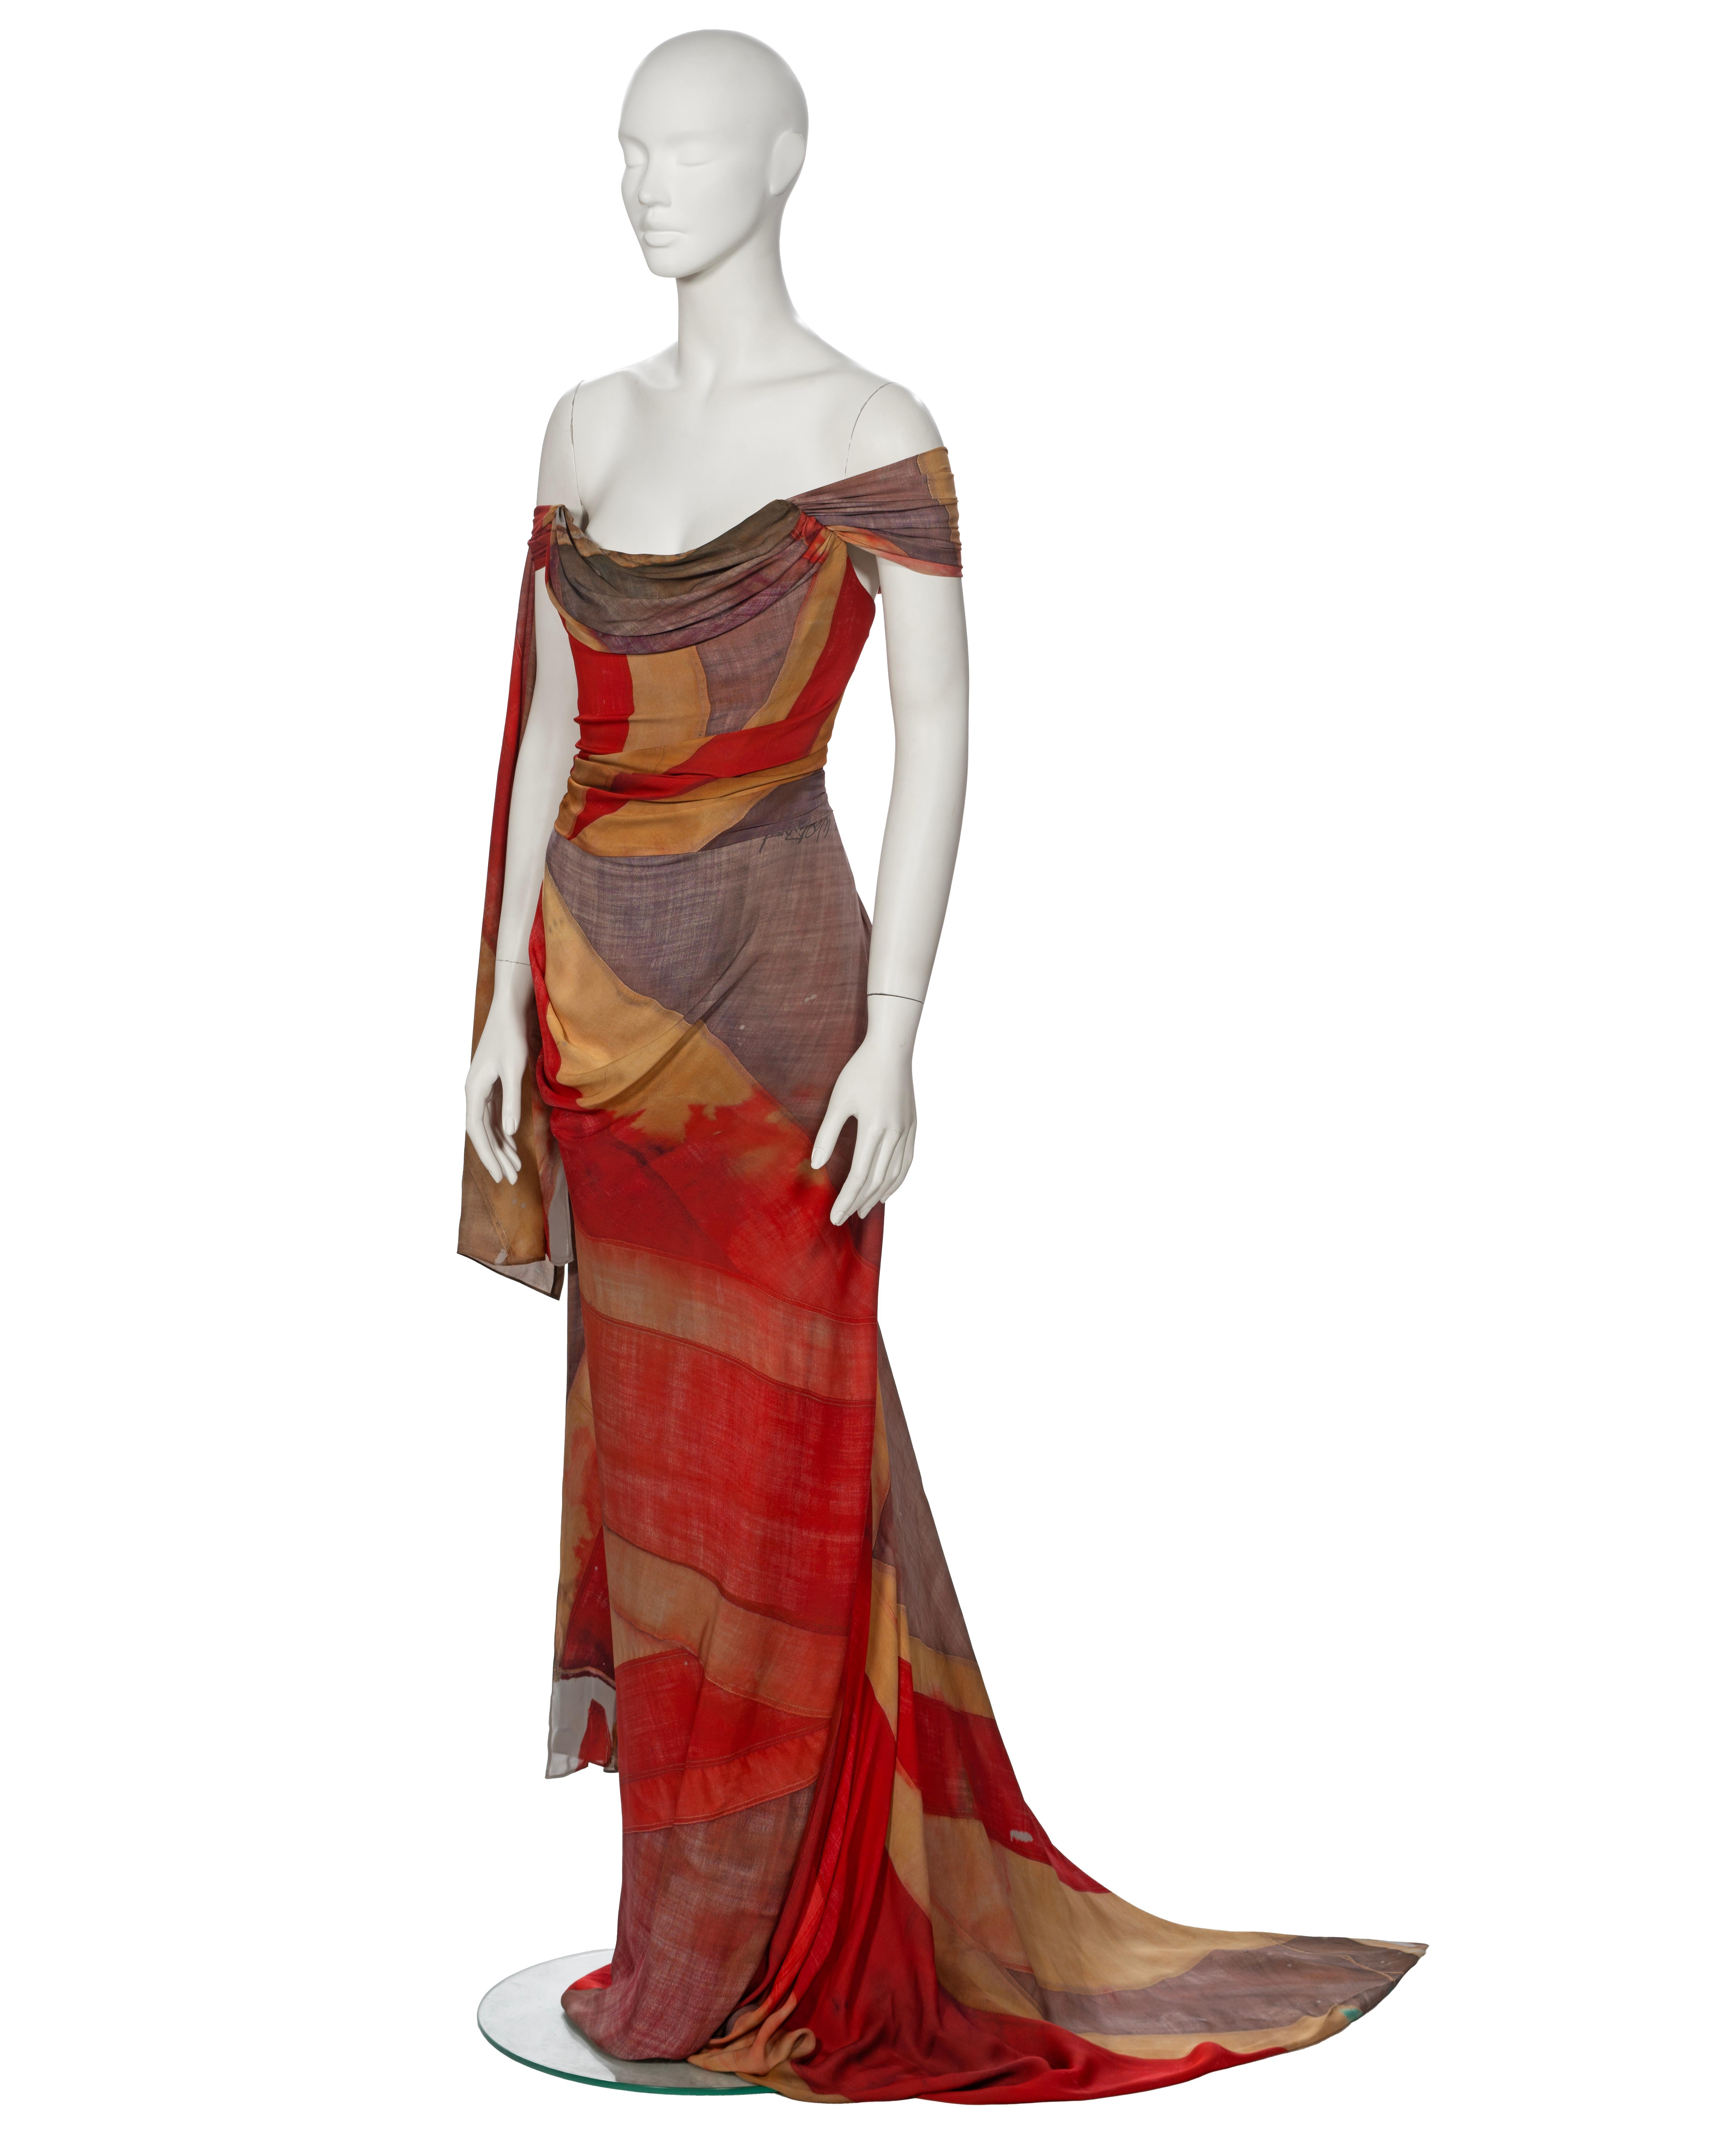 Vivienne Westwood The Queen's Diamond Jubilee Corseted Draped Silk Dress, 2012 For Sale 10